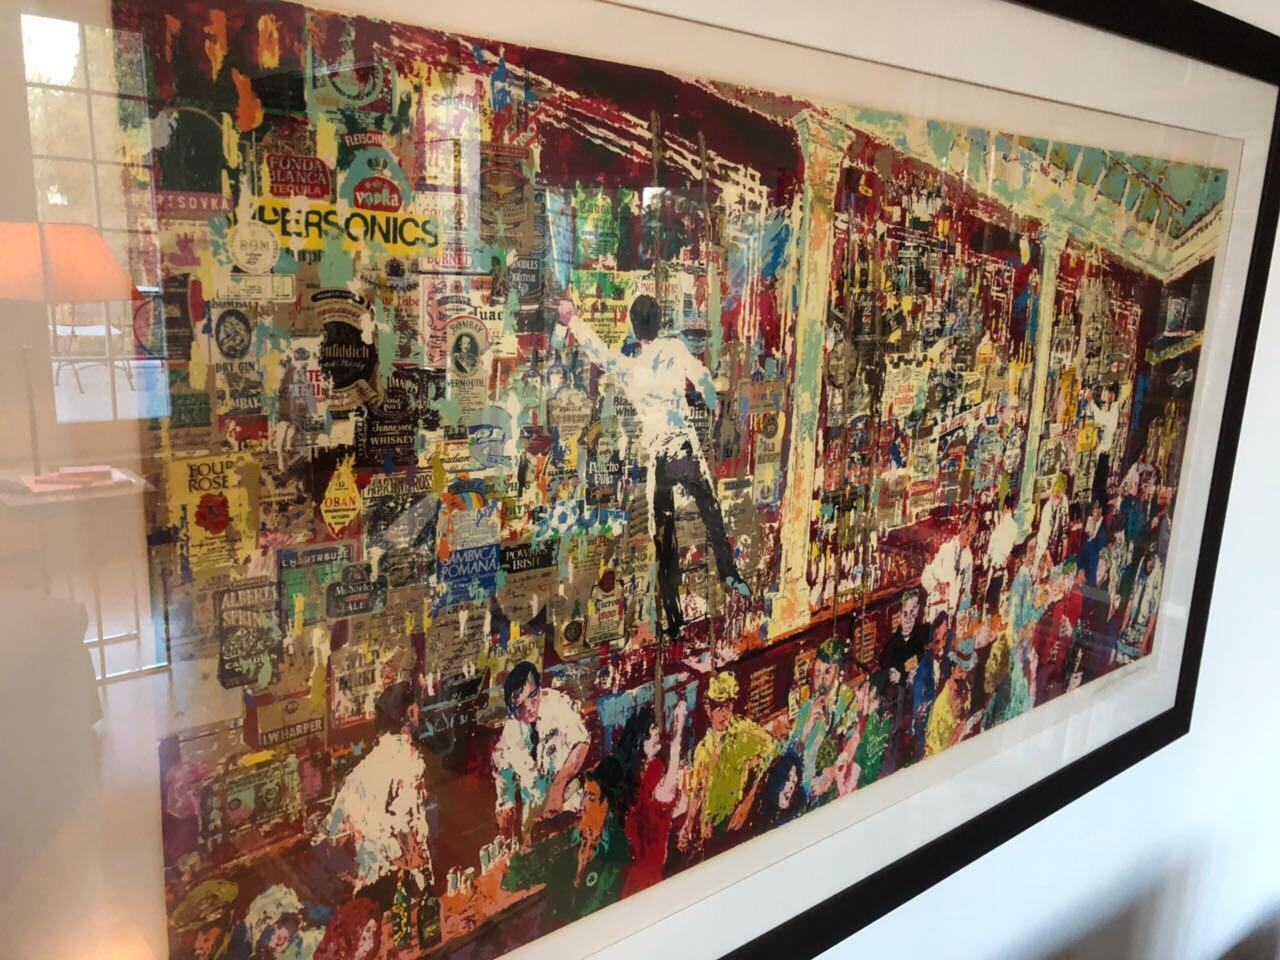 LEROY NEIMAN (1921-2012, NY/IL/MN) F.X. MCRORY'S WHISKEY BAR - 1980 LeRoy Neiman's painting showing the now closed whiskey bar in downtown Seattle. Gouache and pastel on paper , Pencil signed and numbered, limited edition.
Measures 34